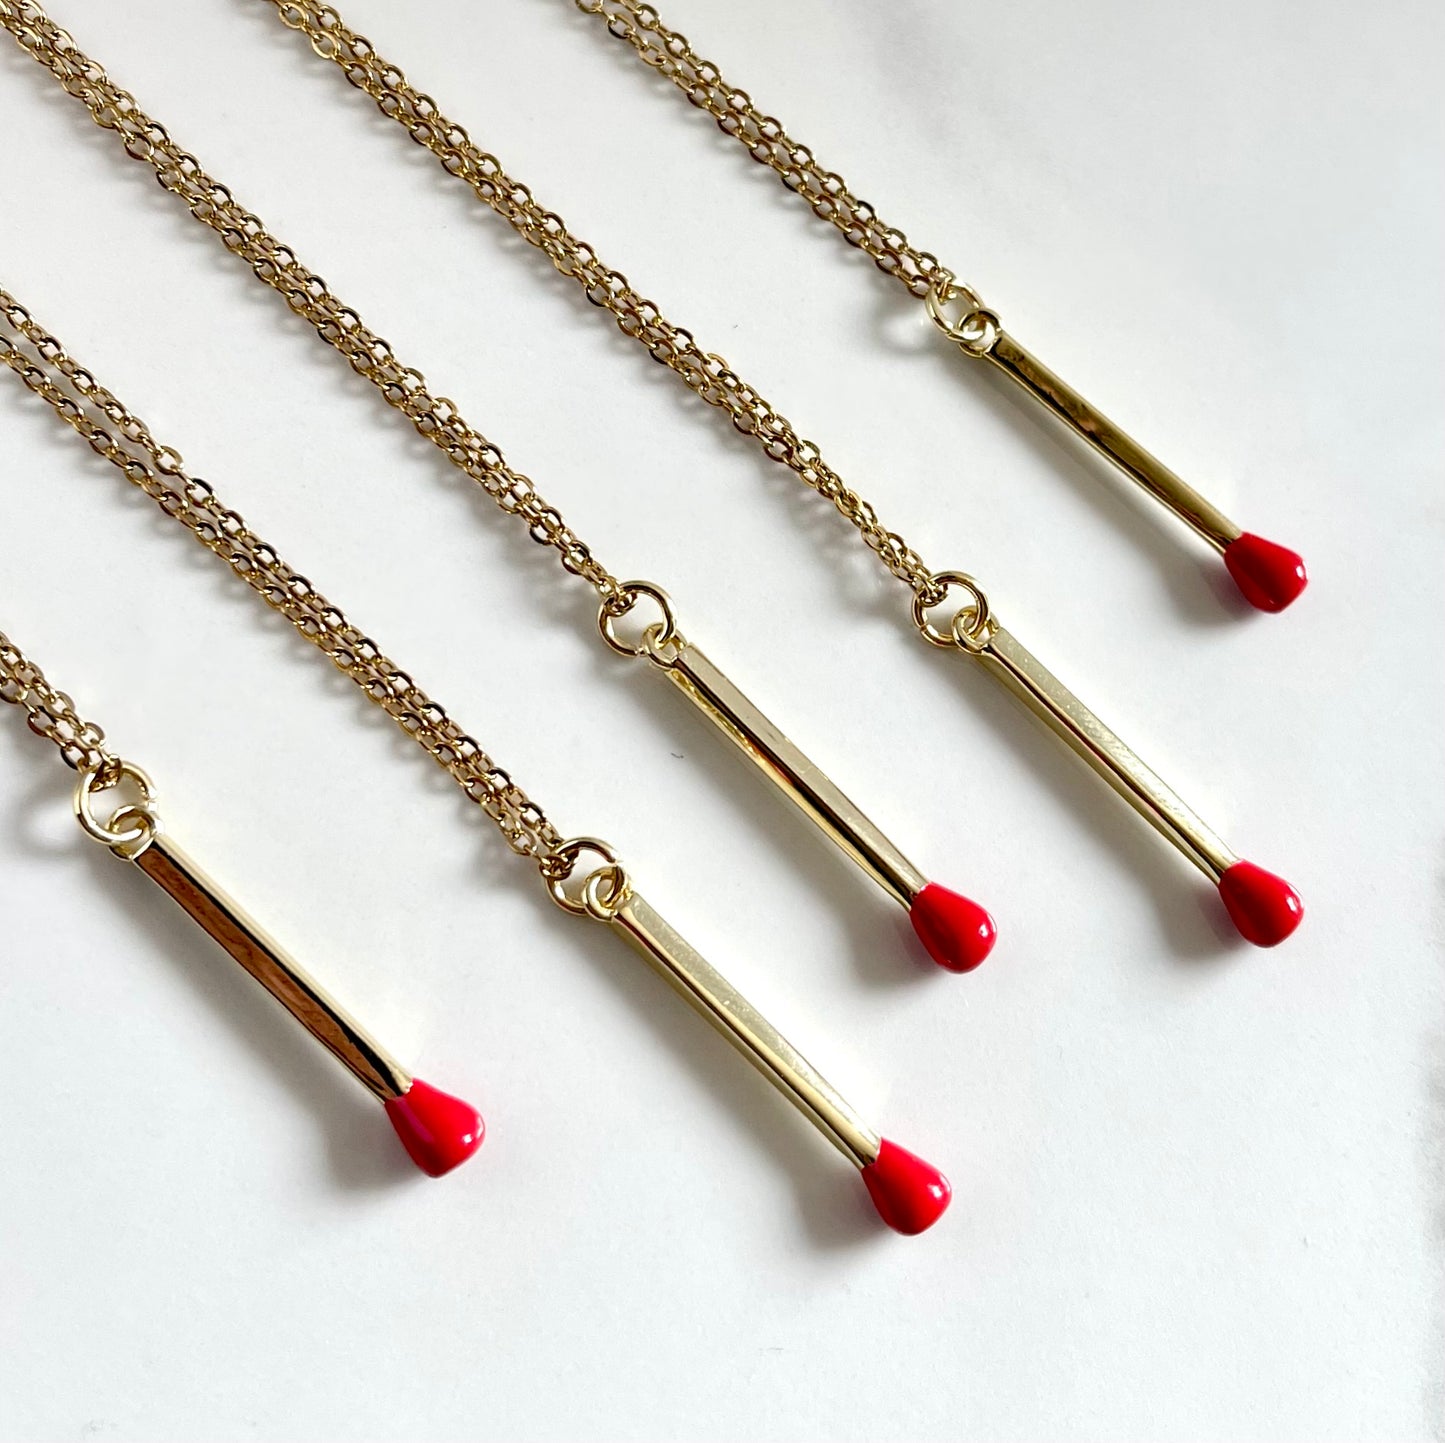 Matchstick Twin Flame Charm Necklace